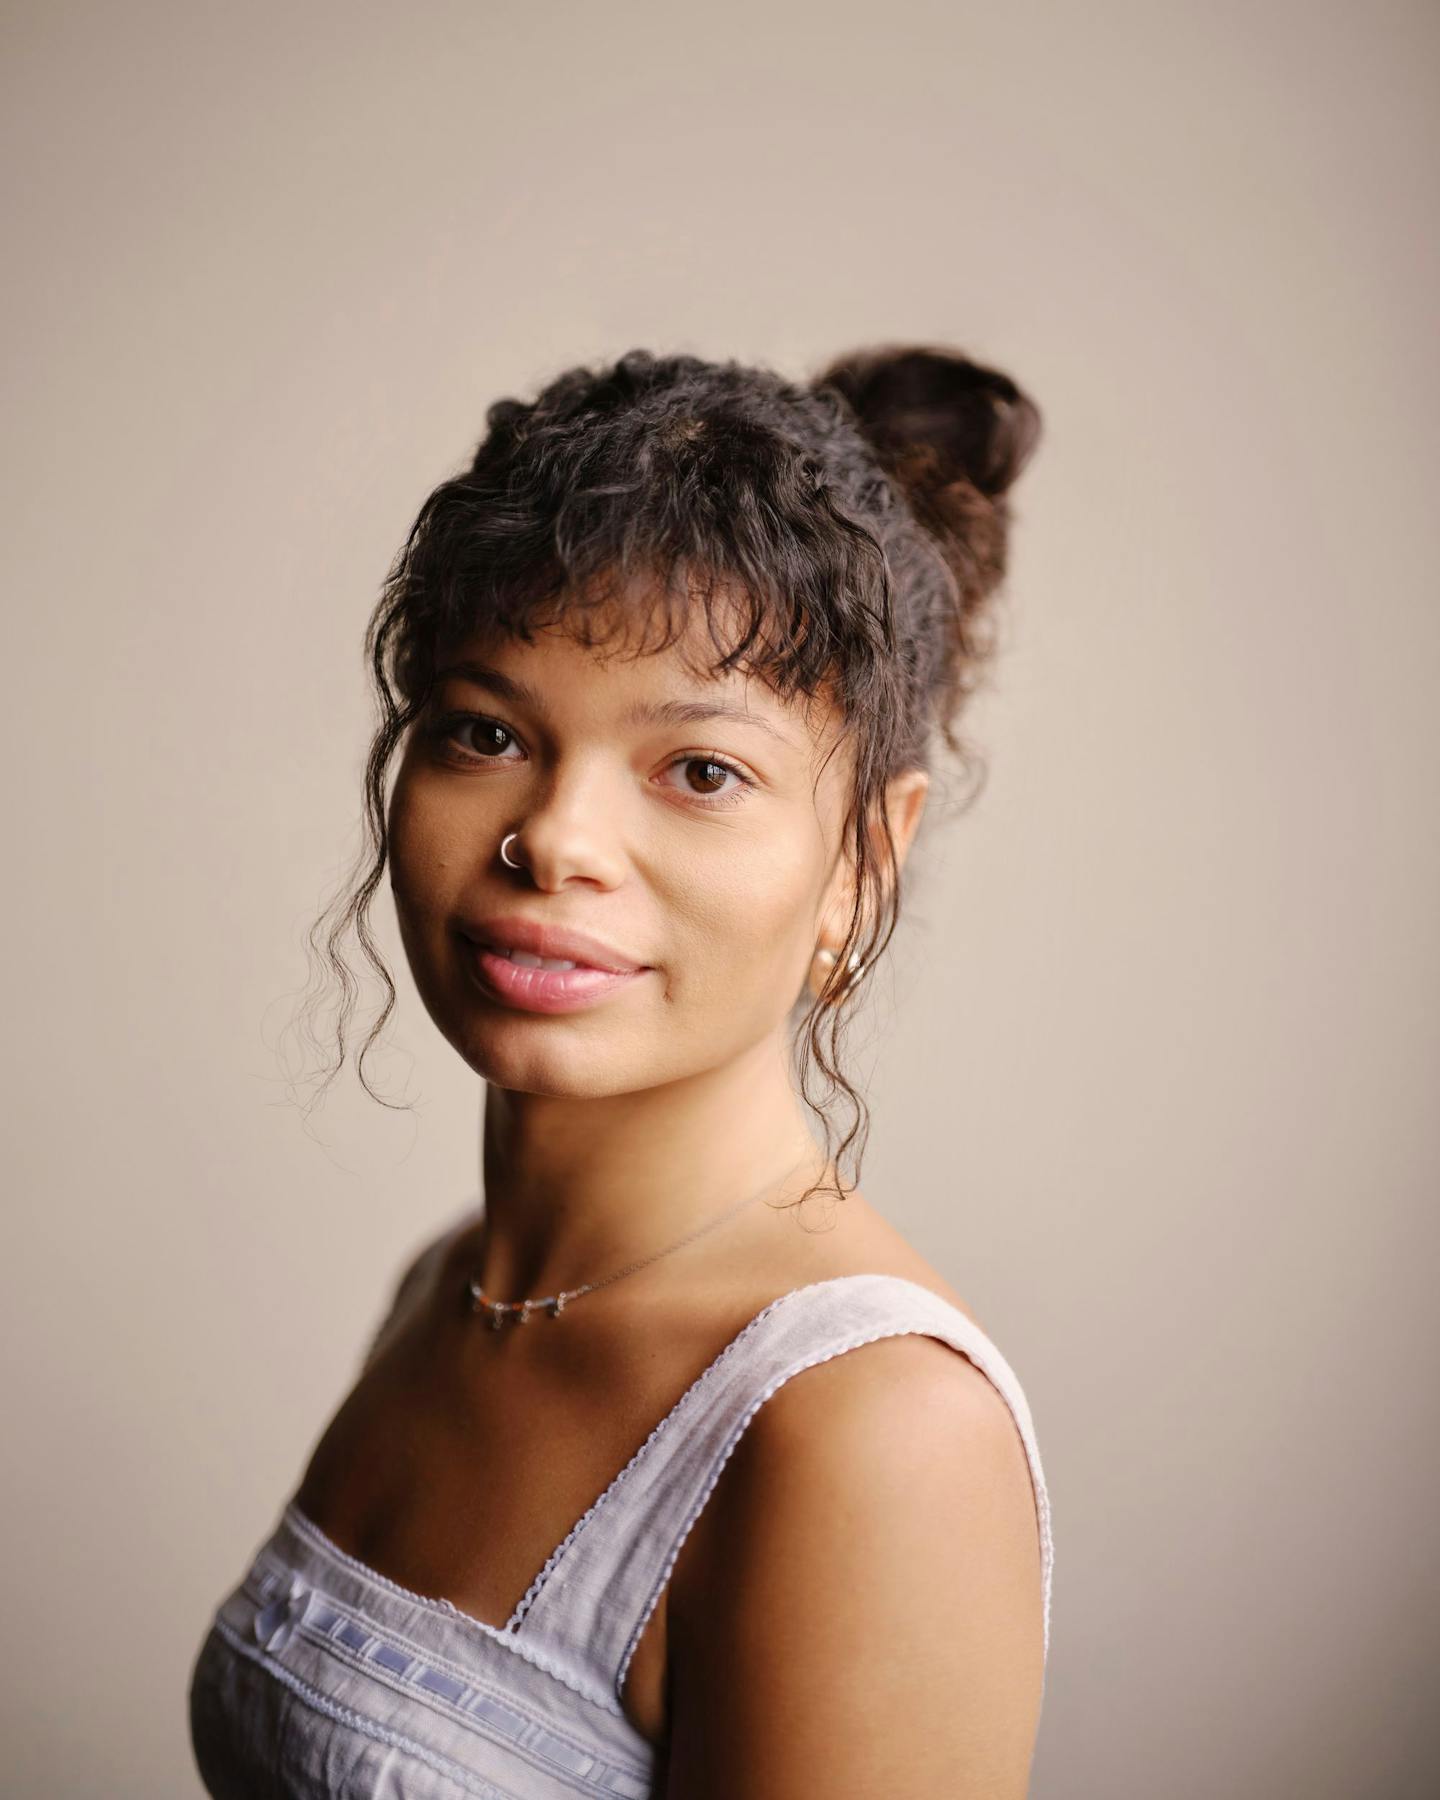 Beth, a twenty-something year-old Mixed-Race woman, is standing in front of a white wall. She is wearing a white vest top, nose ring and hair in a bun with a fringe.